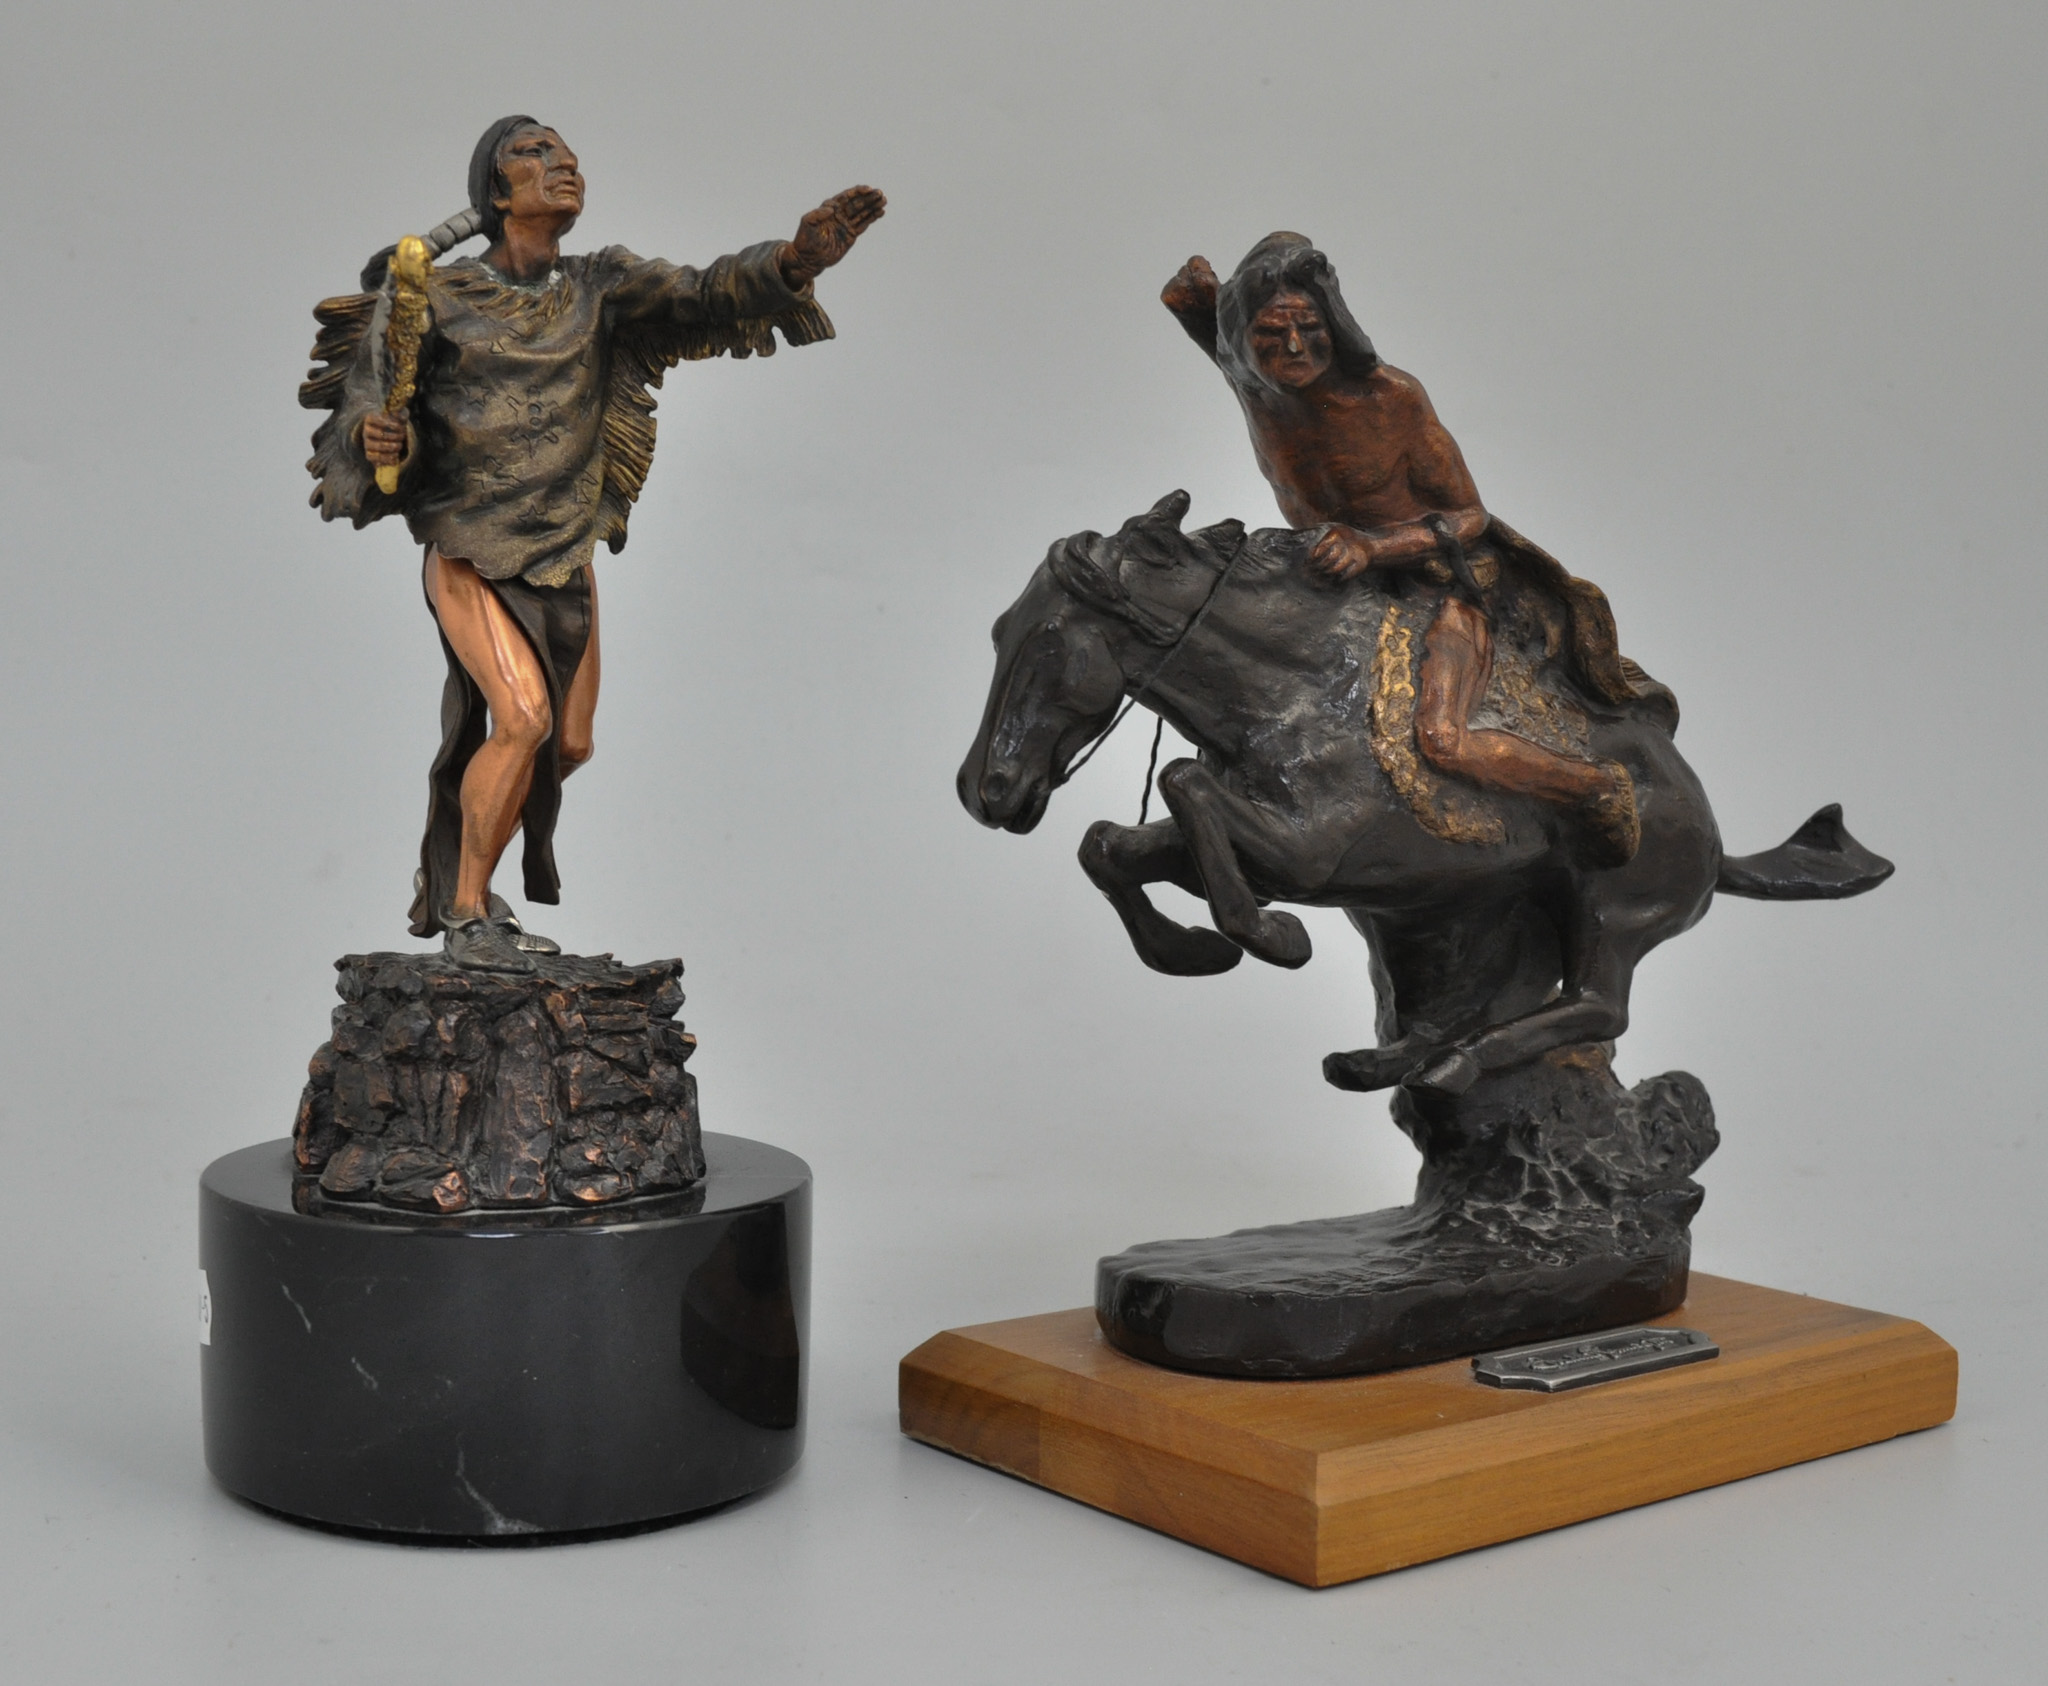 After F Remington, mixed coloured bronzed figure, "Cheyenne" on wooden plinth, height 21cm,